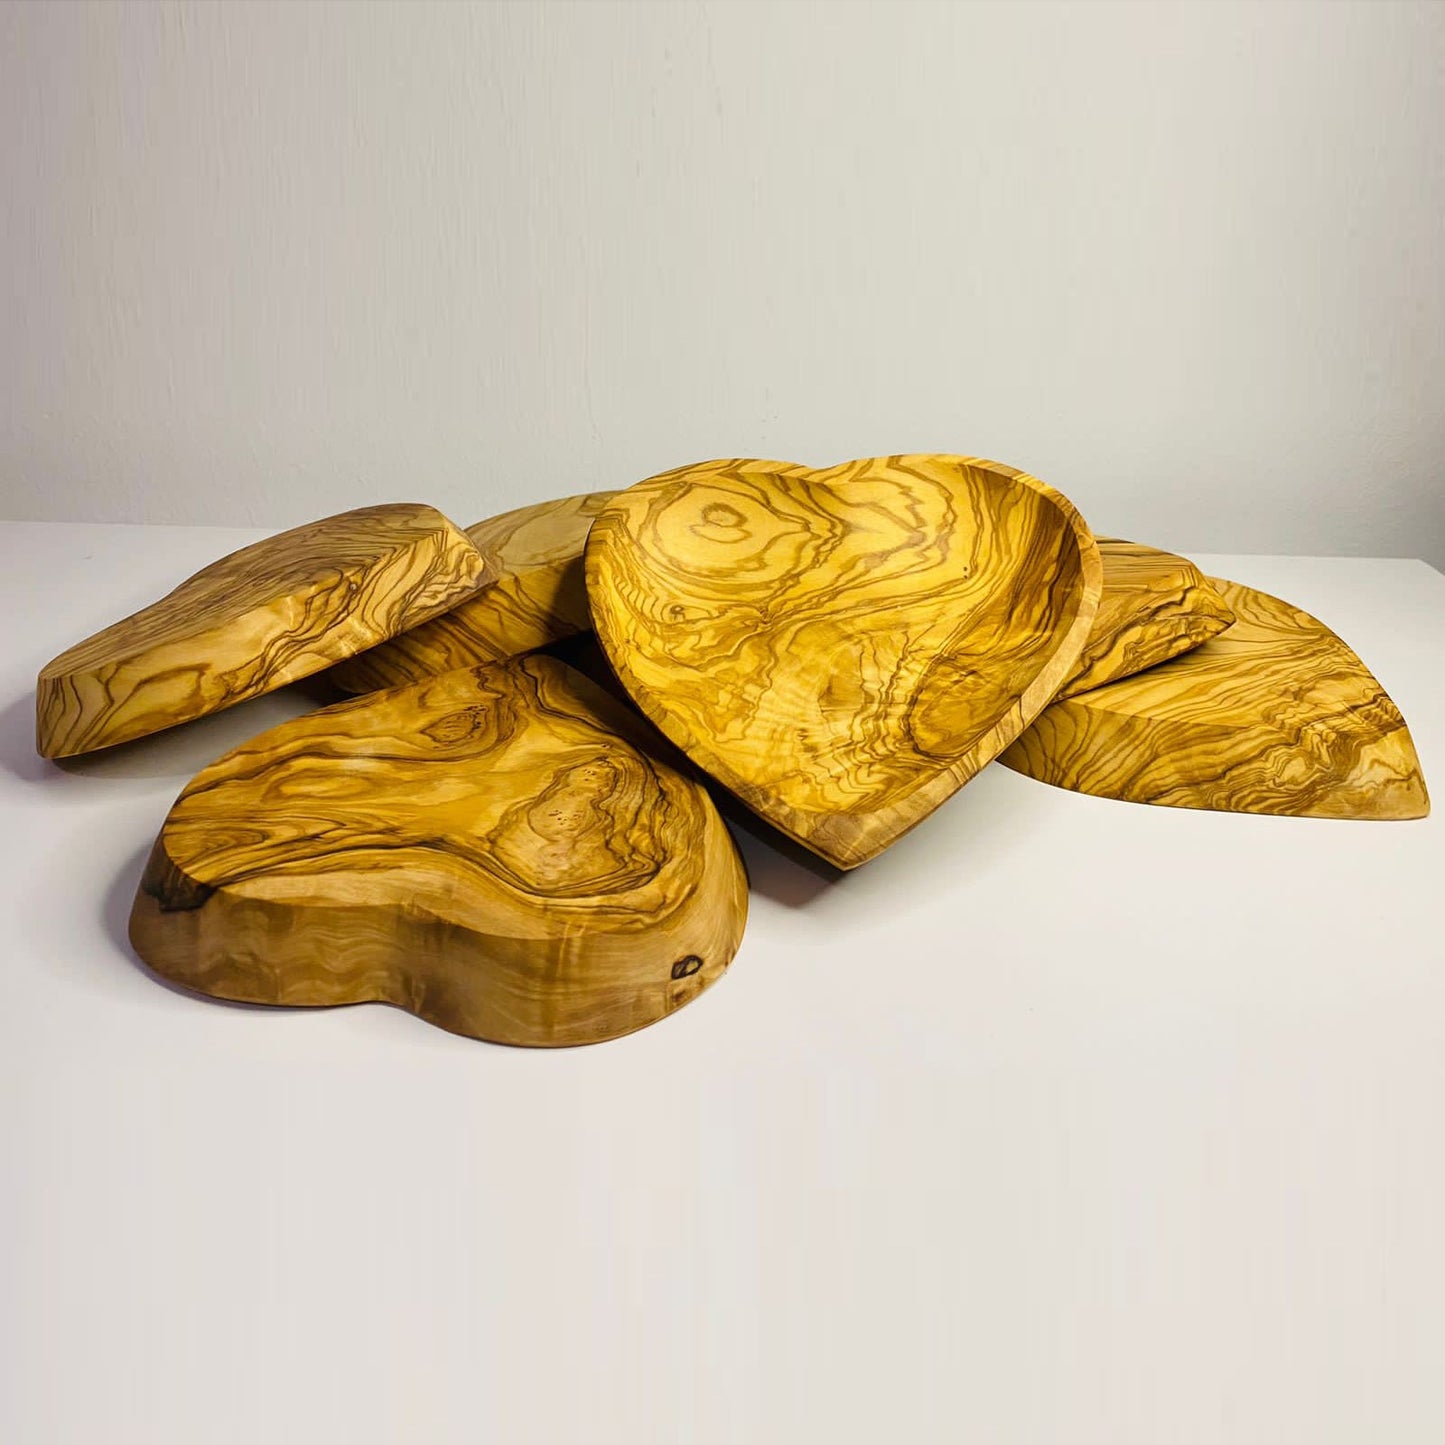 VOW | Olive Wood Heart Rolling Tray/Smoker's Gift_3